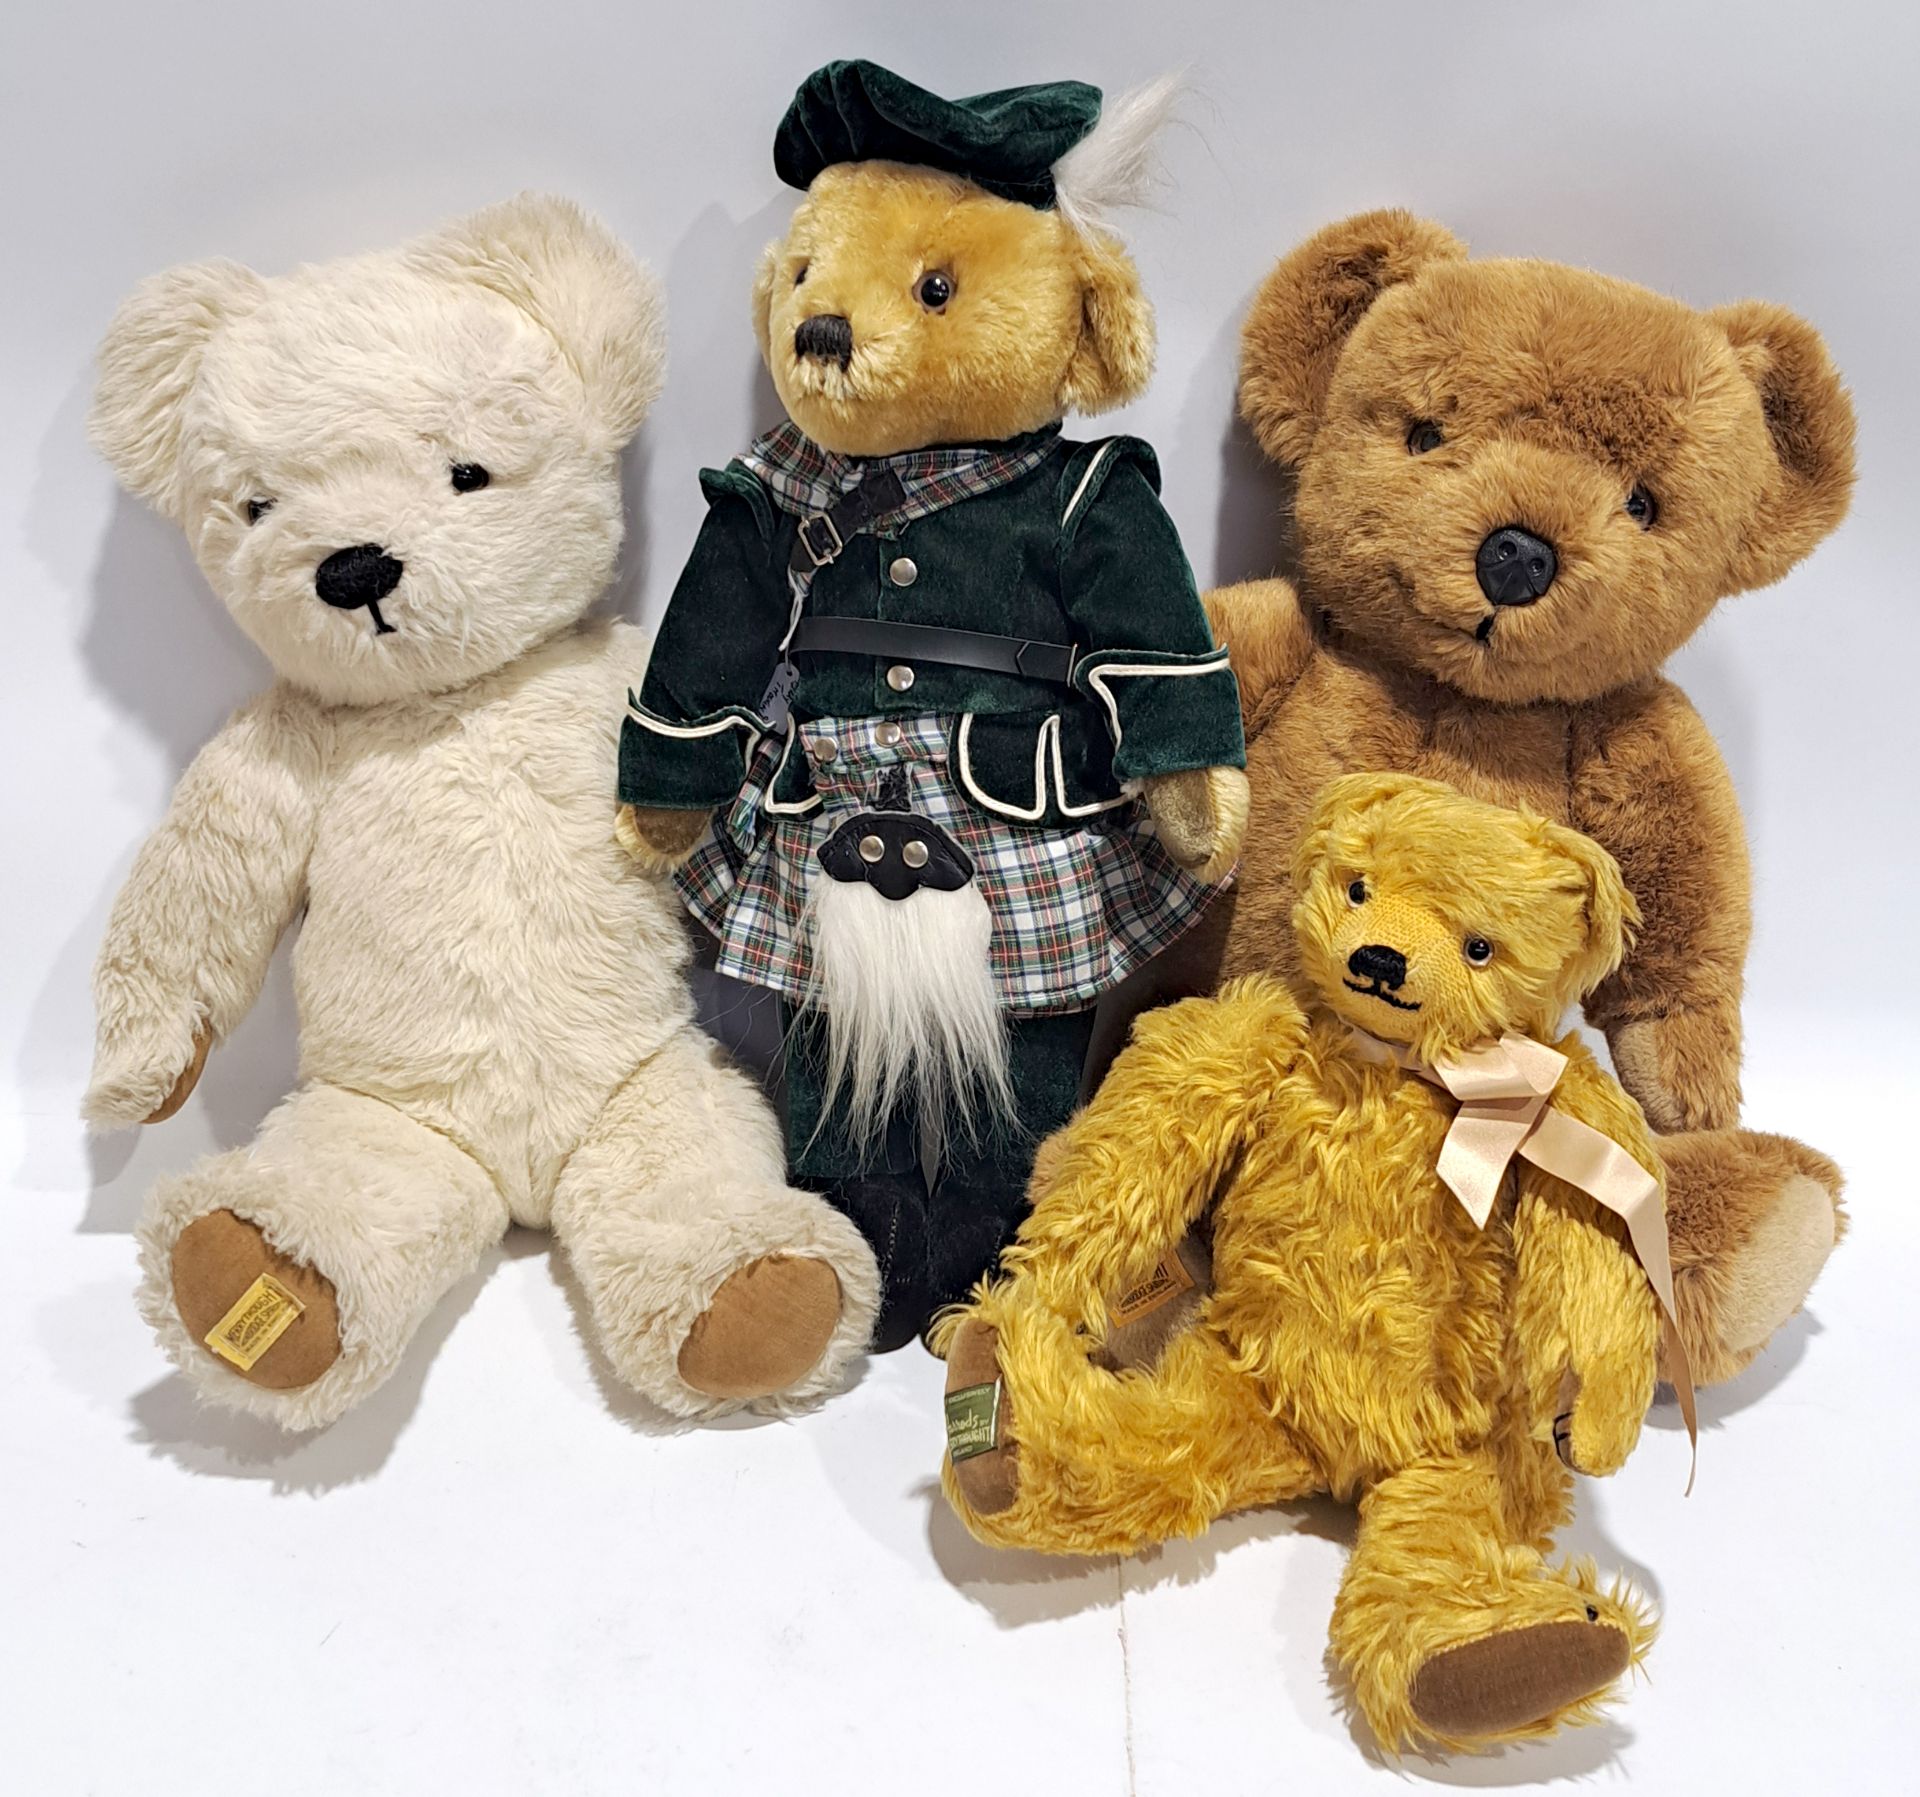 Merrythought group of teddy bears